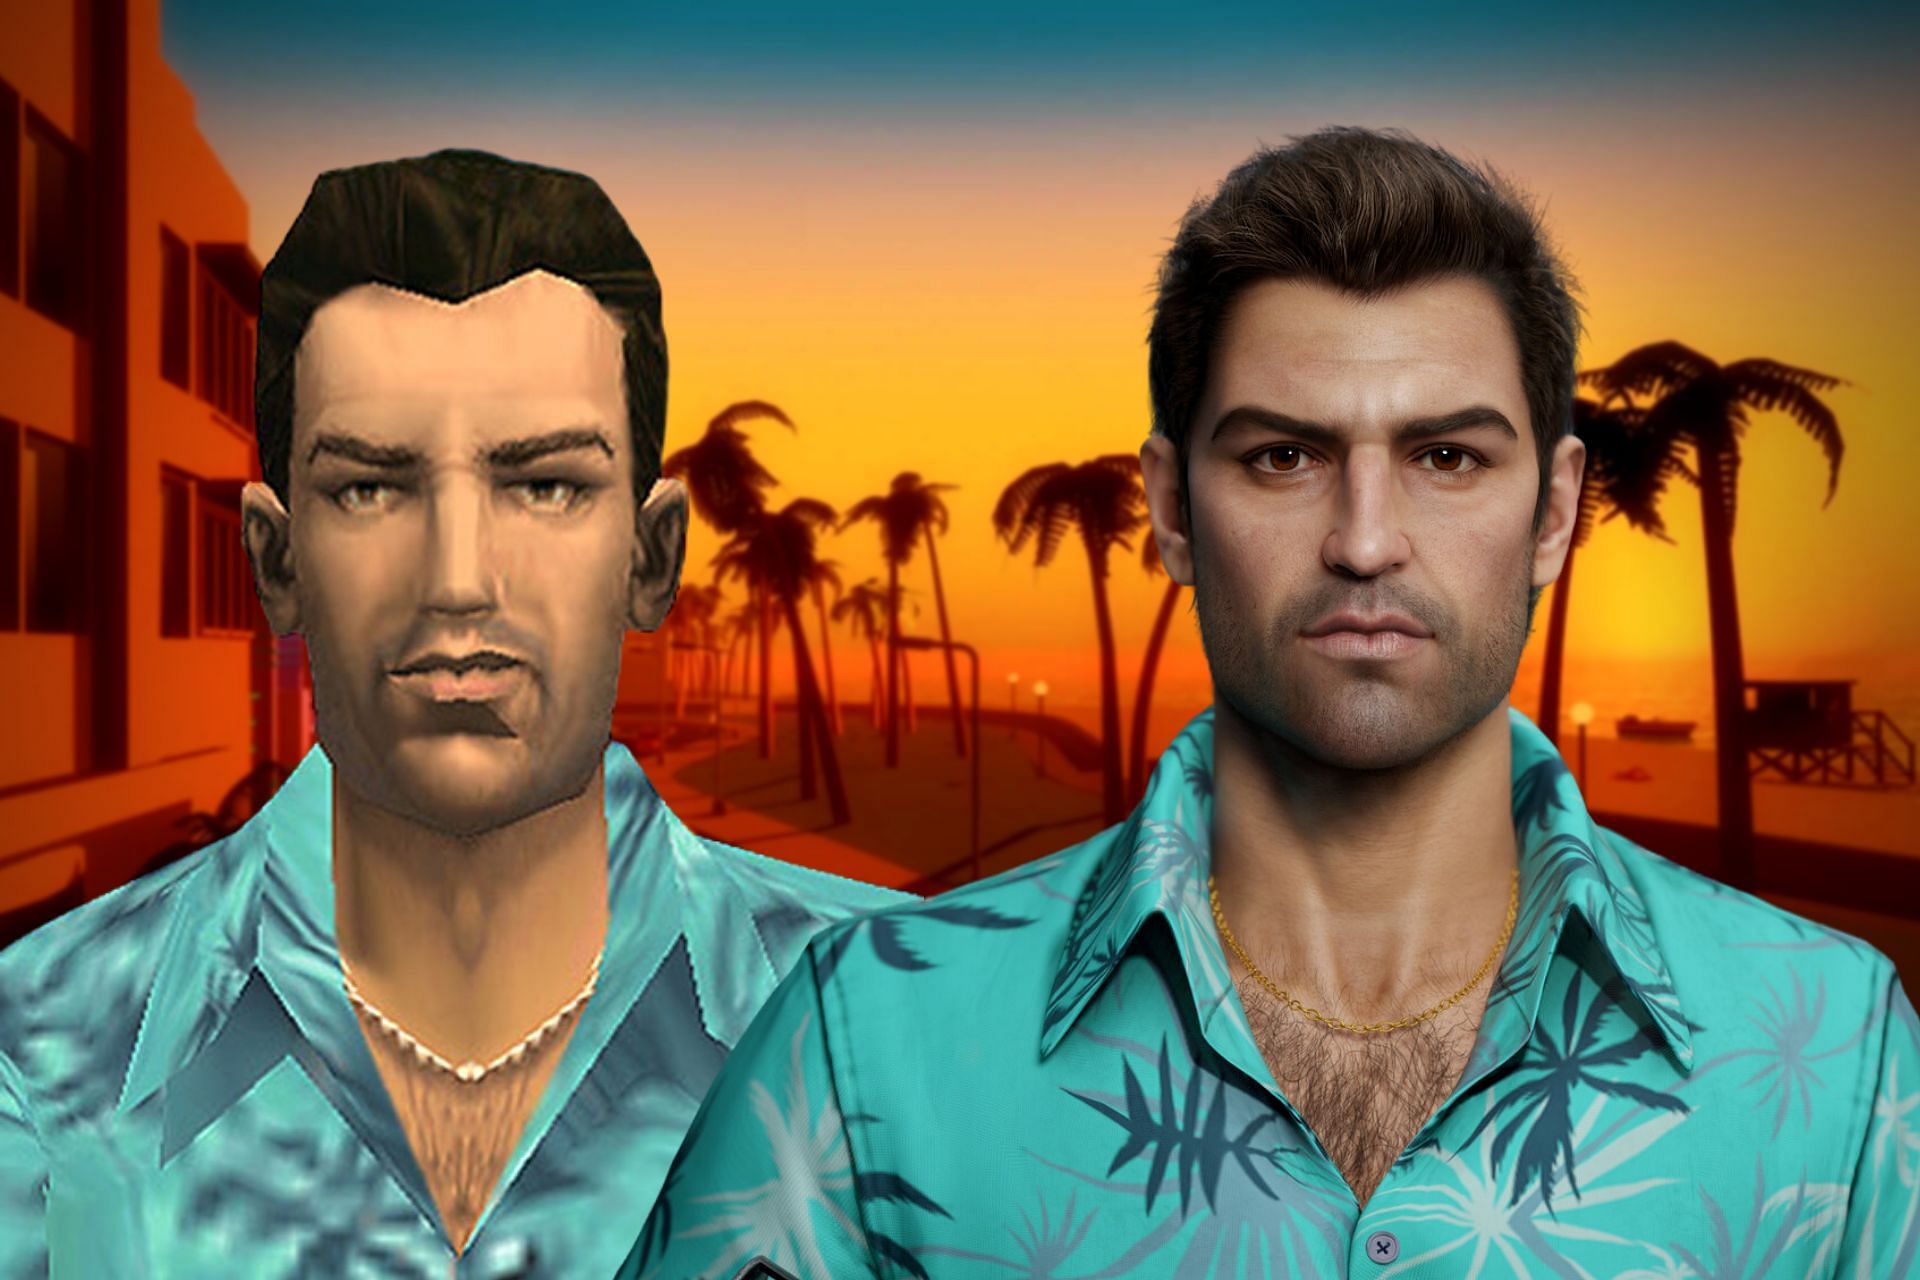 GTA Vice City is a legendary game that deserves to be introduced to new audiences in a proper way (Image via Hossein Diba/)